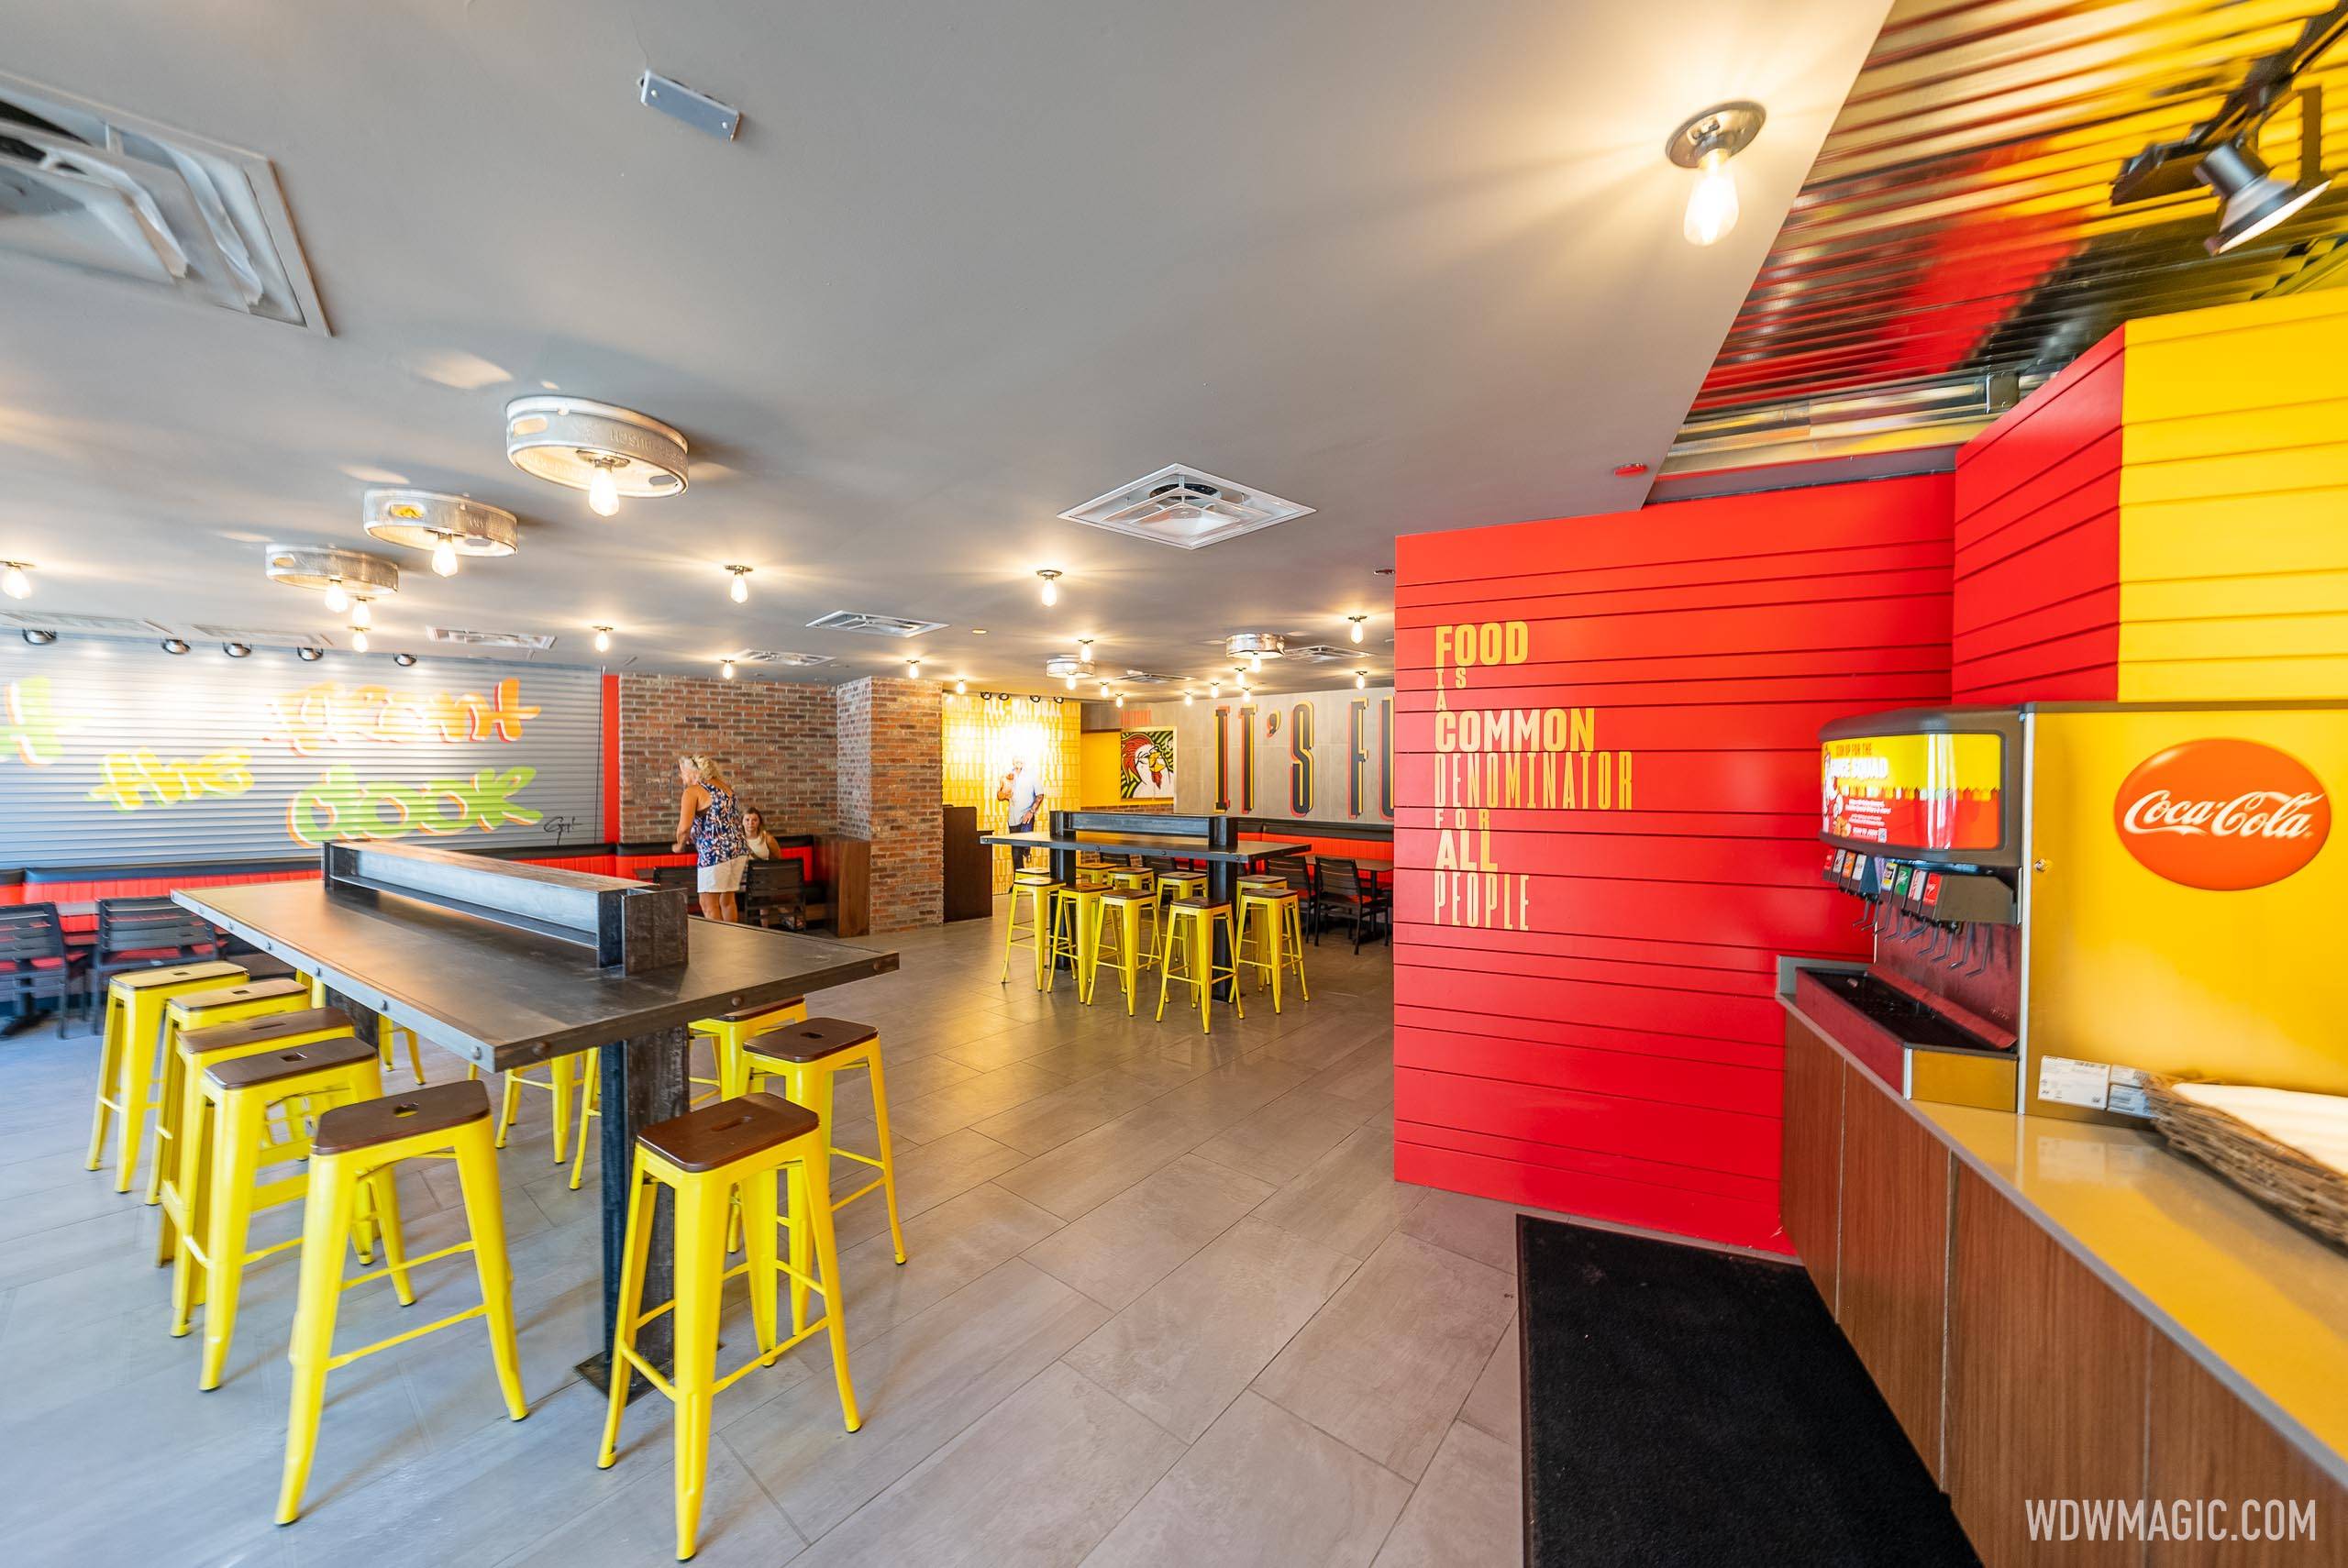 The new dining room features colorful graphics and a picture of Guy Fieri